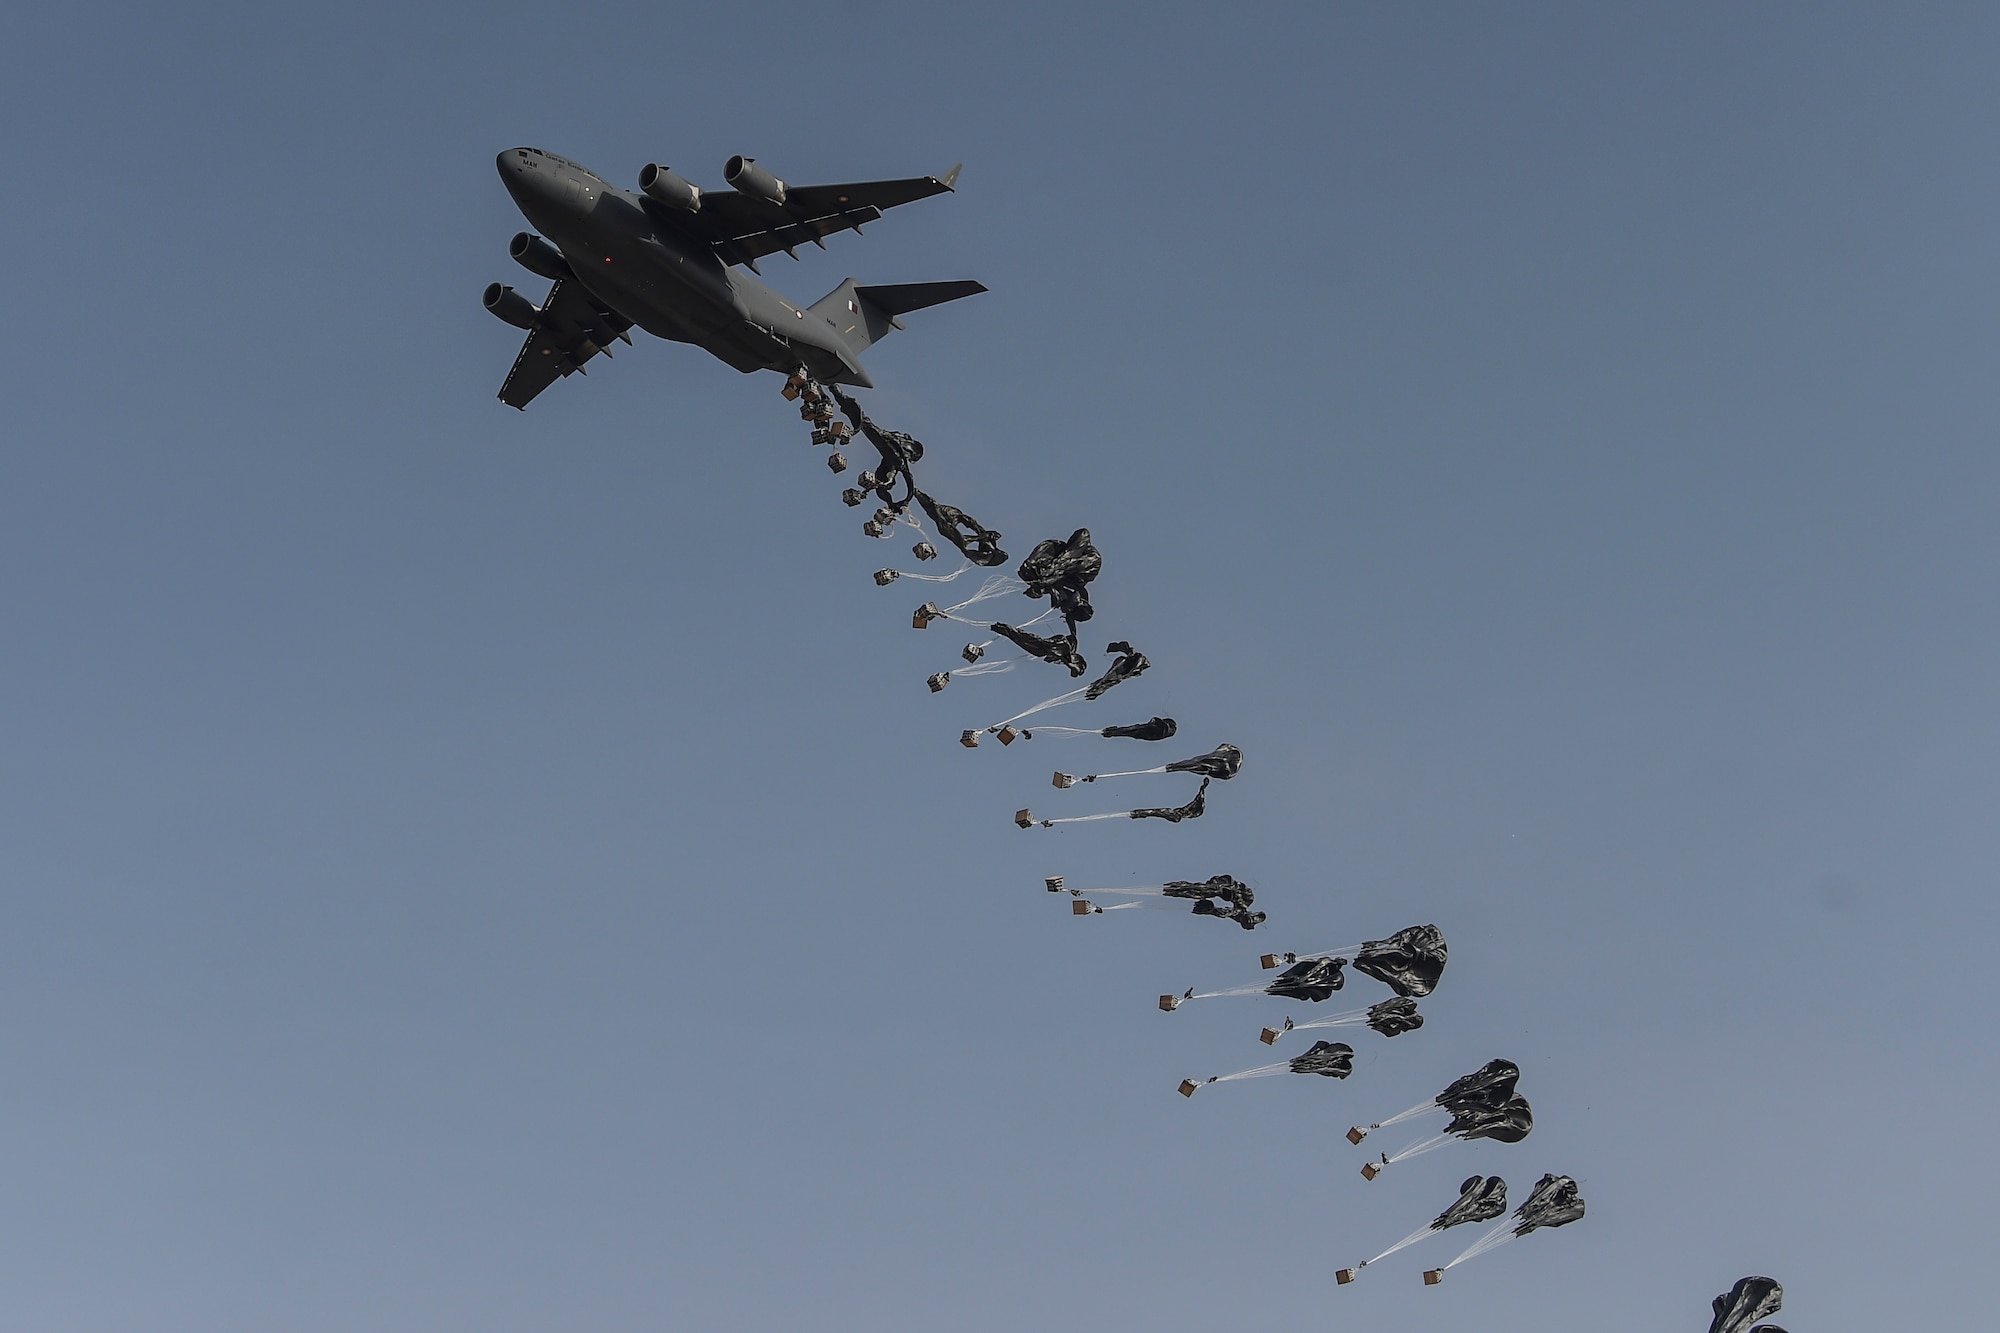 A Qatar Emiri Air Force C-17 Globemaster performs an airdrop during the (QEAF) Lahoub exercise at Al-Qalael dropzone, Qatar, May 9, 2018. The QEAF recently sent one of their C-17 aircrews back to the U.S. to receive airdrop training. This is a new capability for the QEAF and the first C-17 airdrop capability in the Gulf Corporation Council. (U.S. Air Force photo by Staff Sgt. Corey Hook)